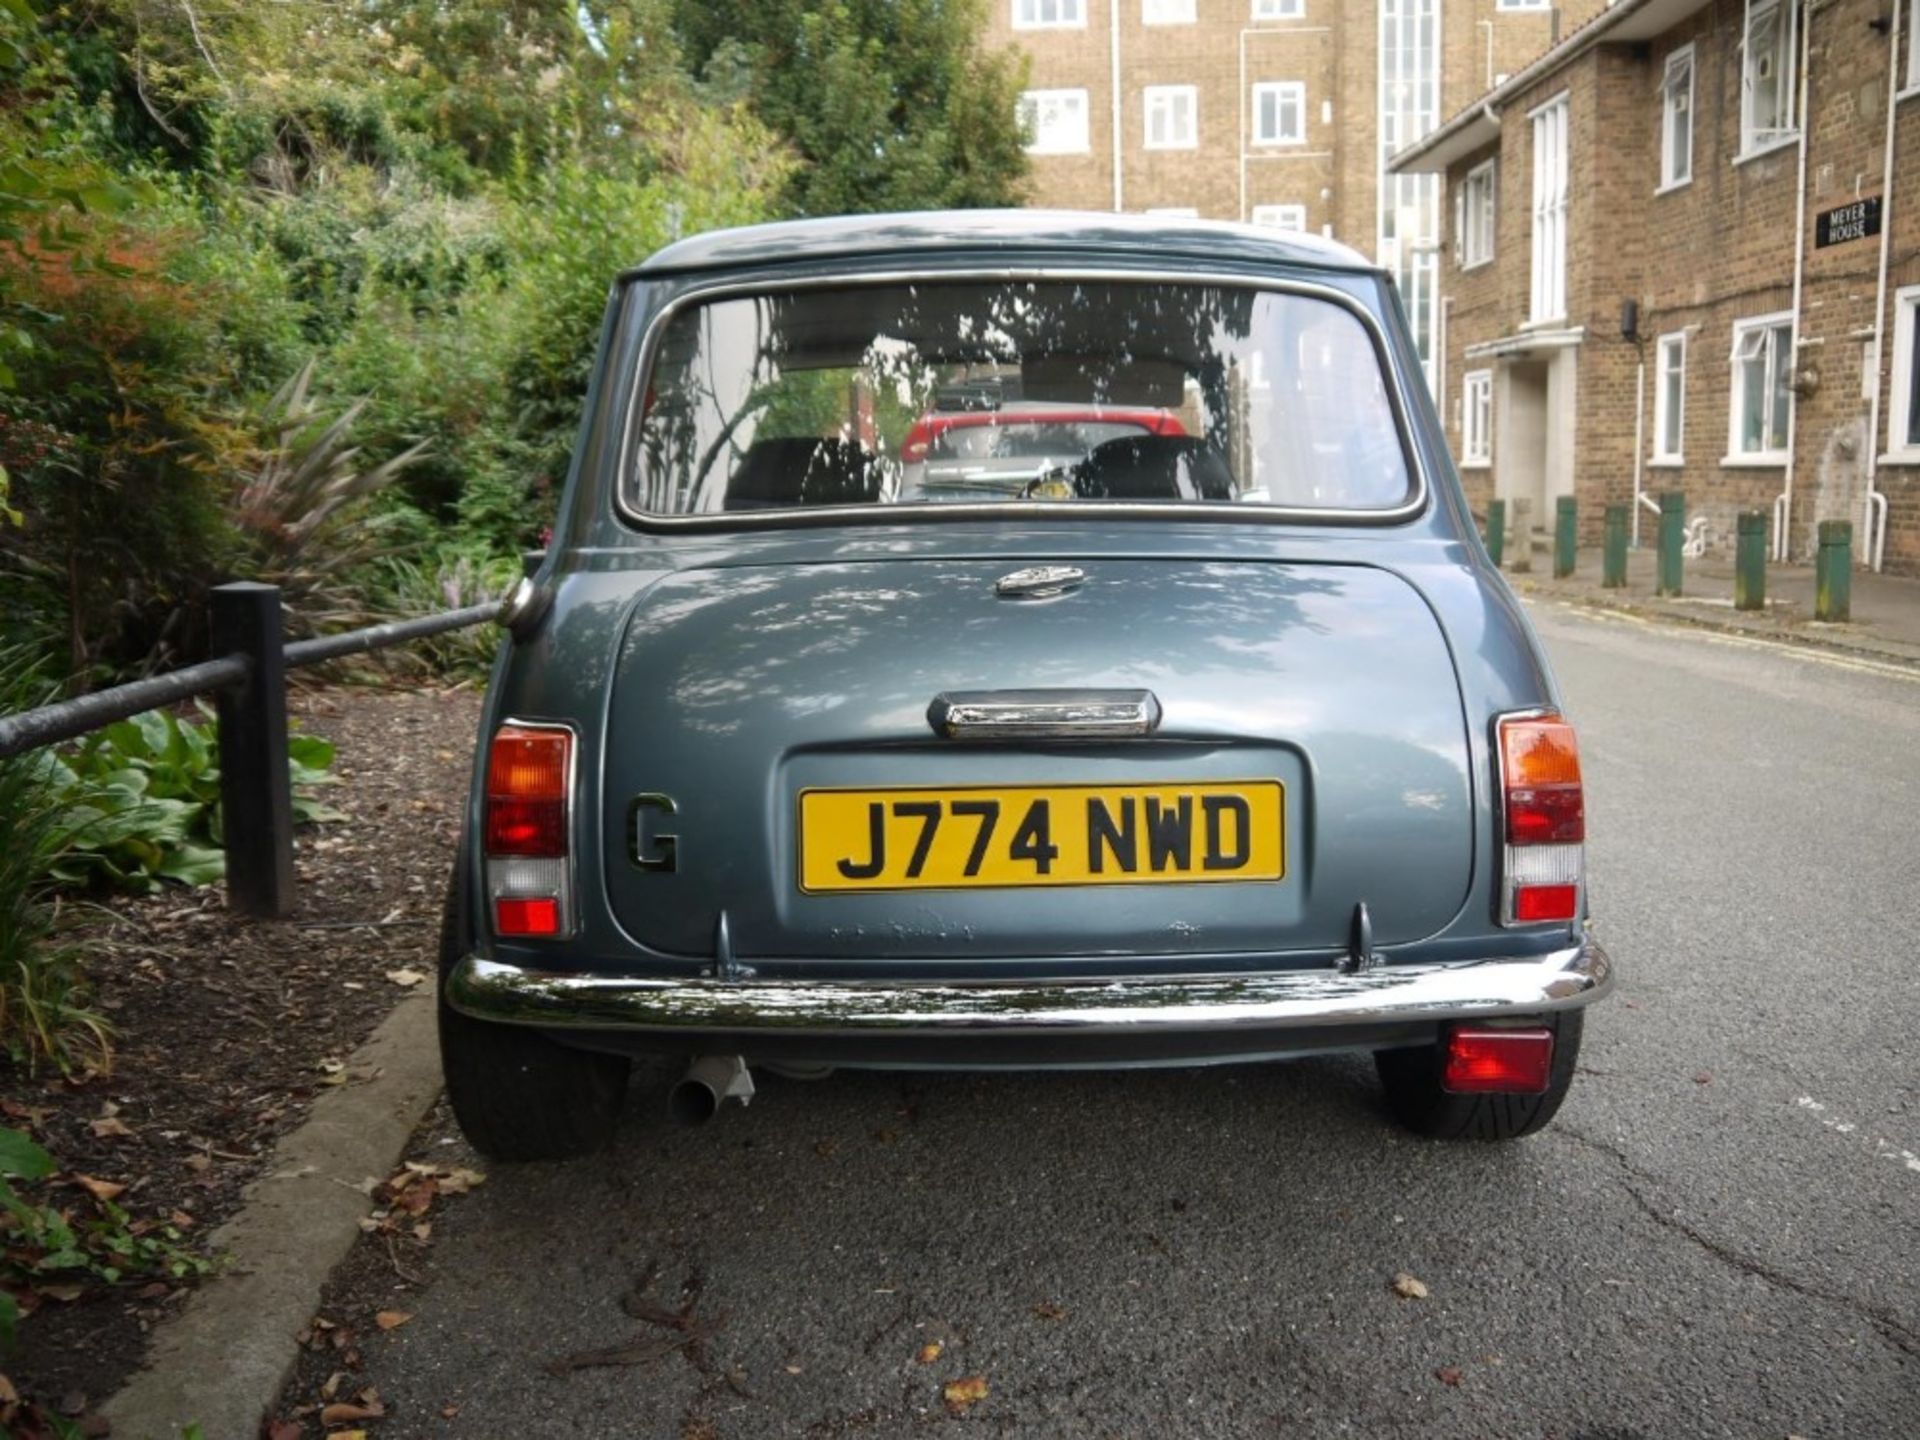 1991 ROVER MINI NEON Registration Number: J774 NWD Recorded Mileage: 58,000 miles Chassis Number: - Image 24 of 24